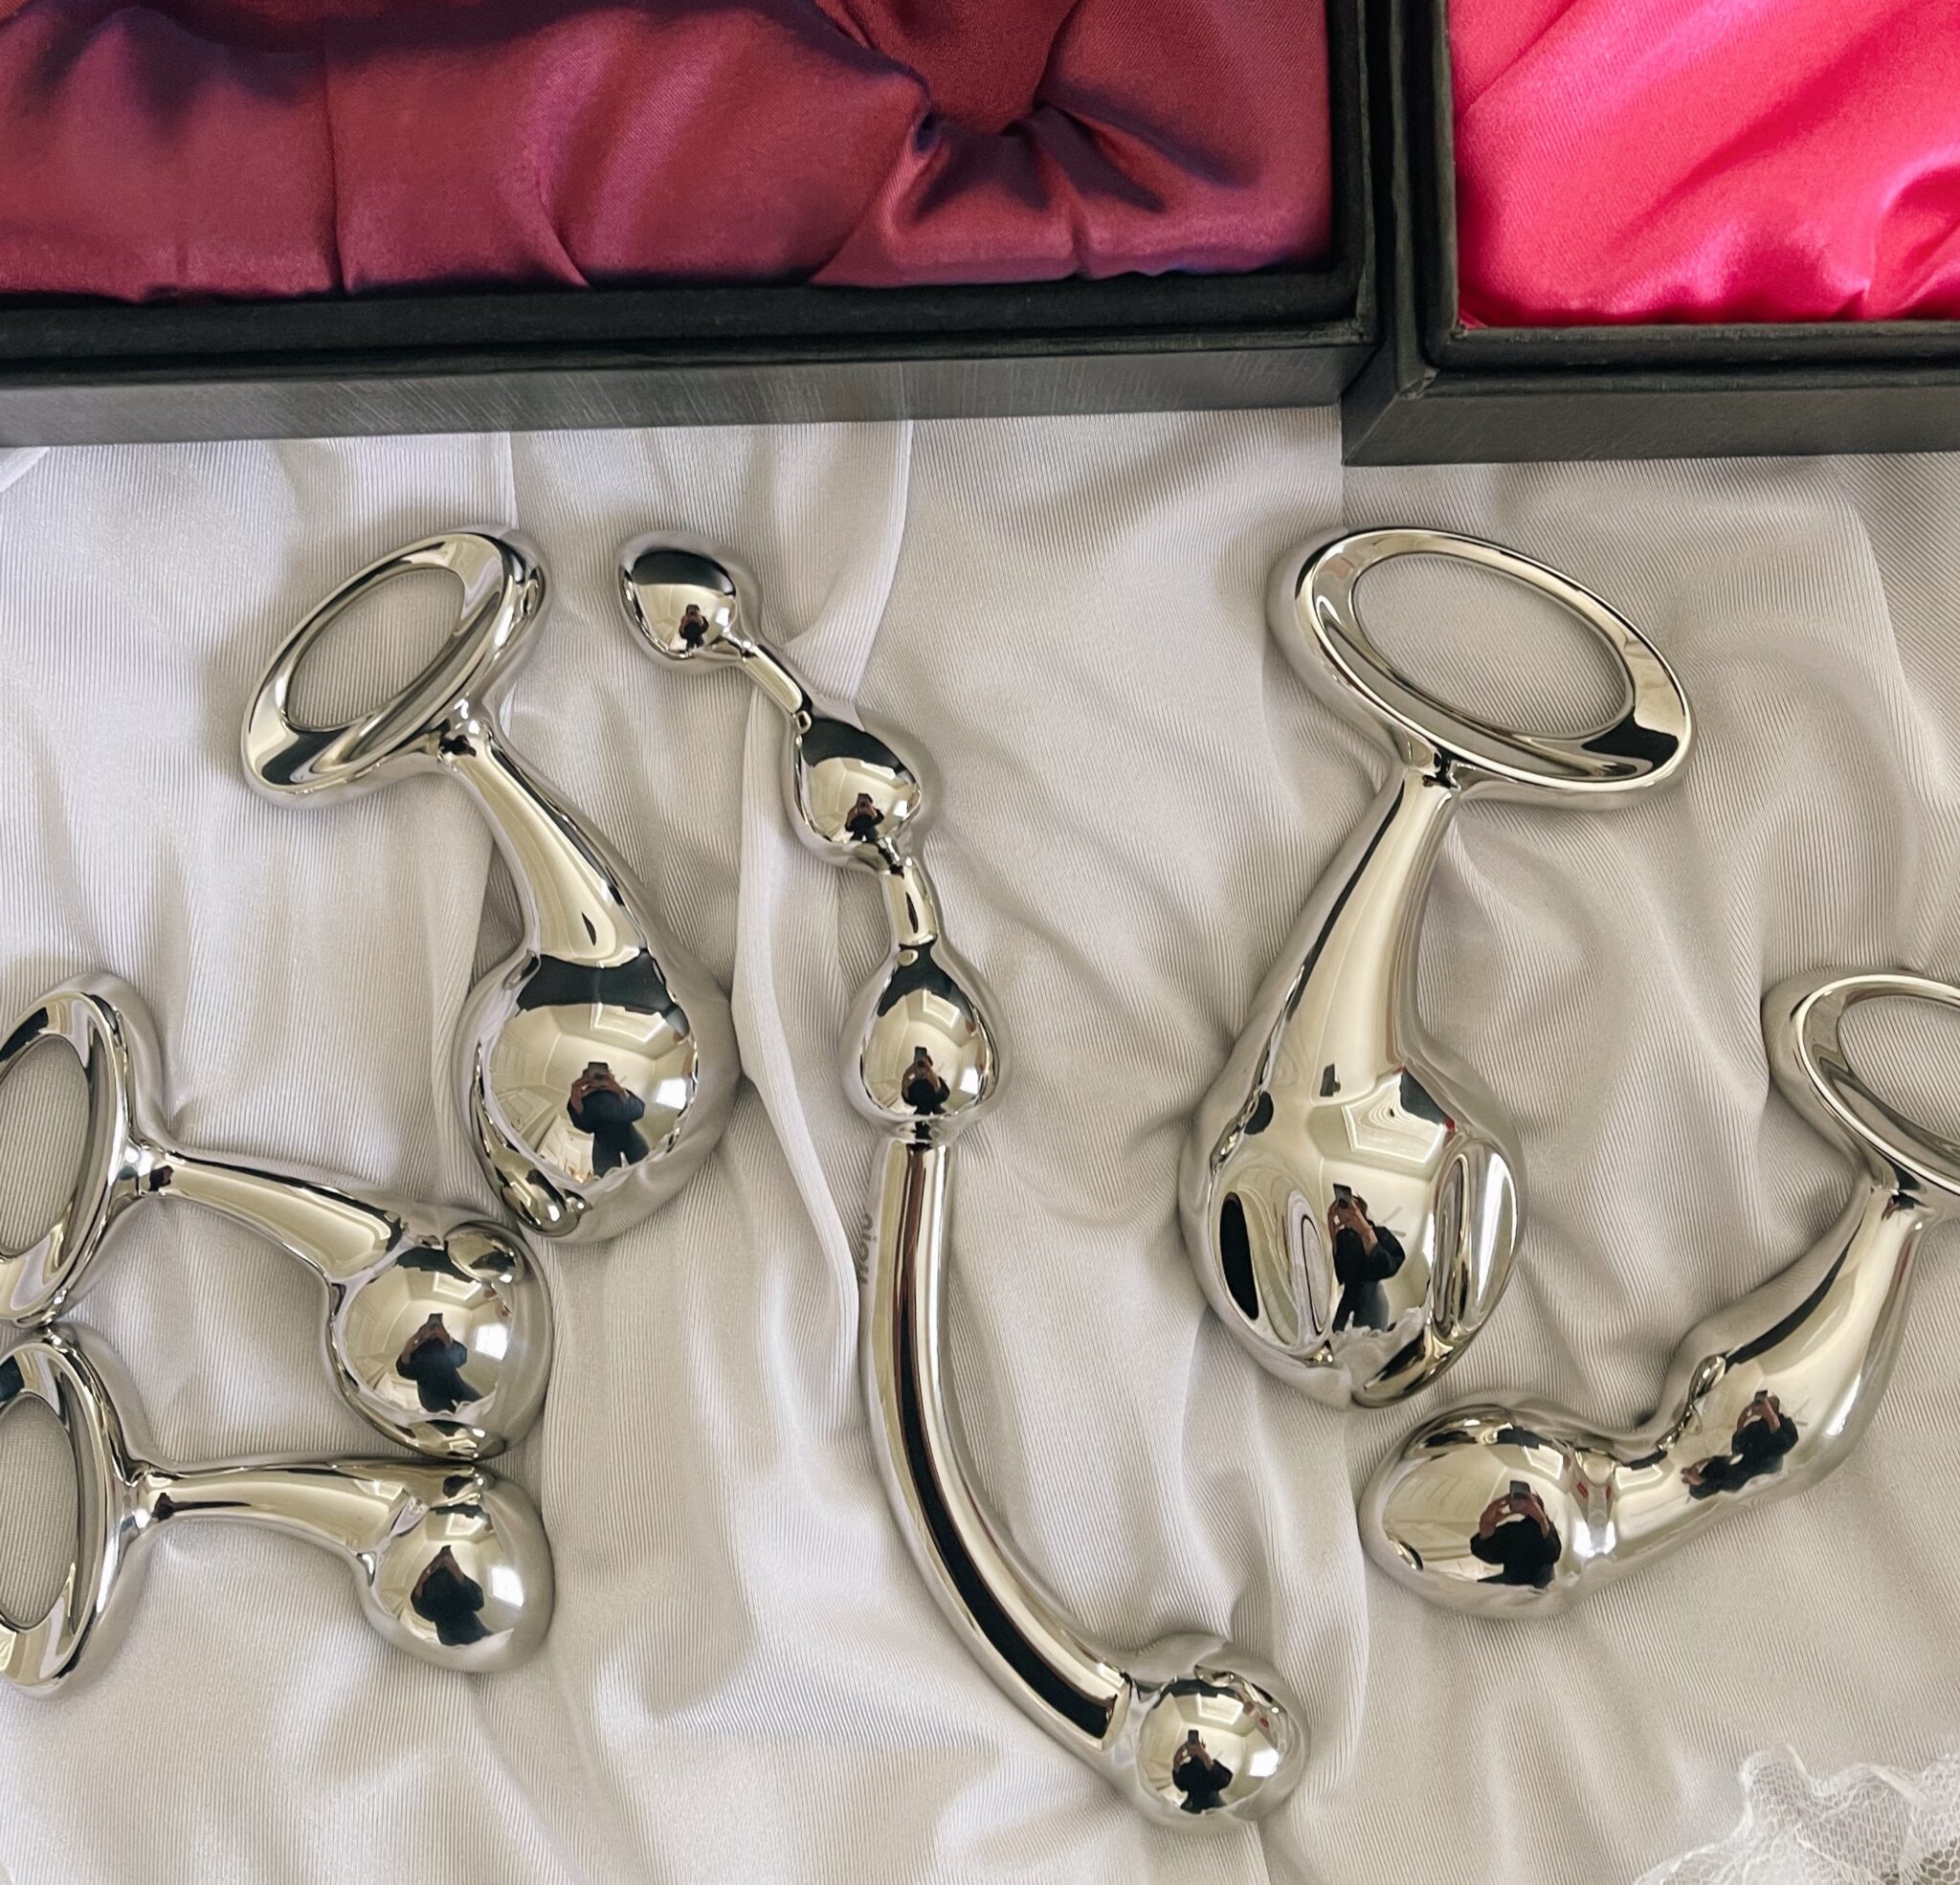 A variety of Njoy stainless steal toys and butt plugs.